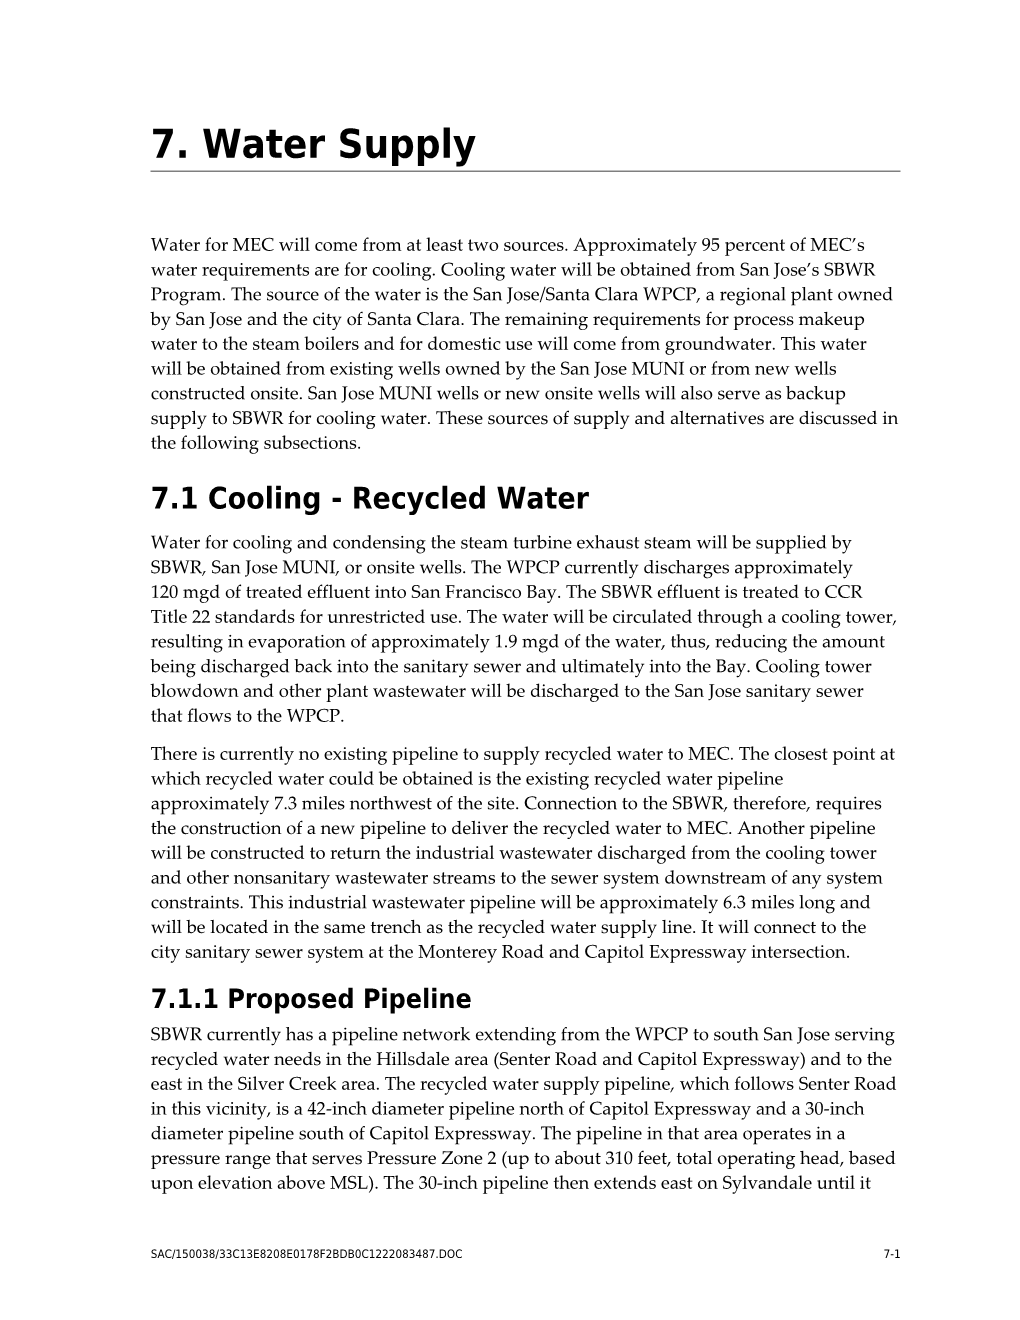 7.1 Cooling - Recycled Water